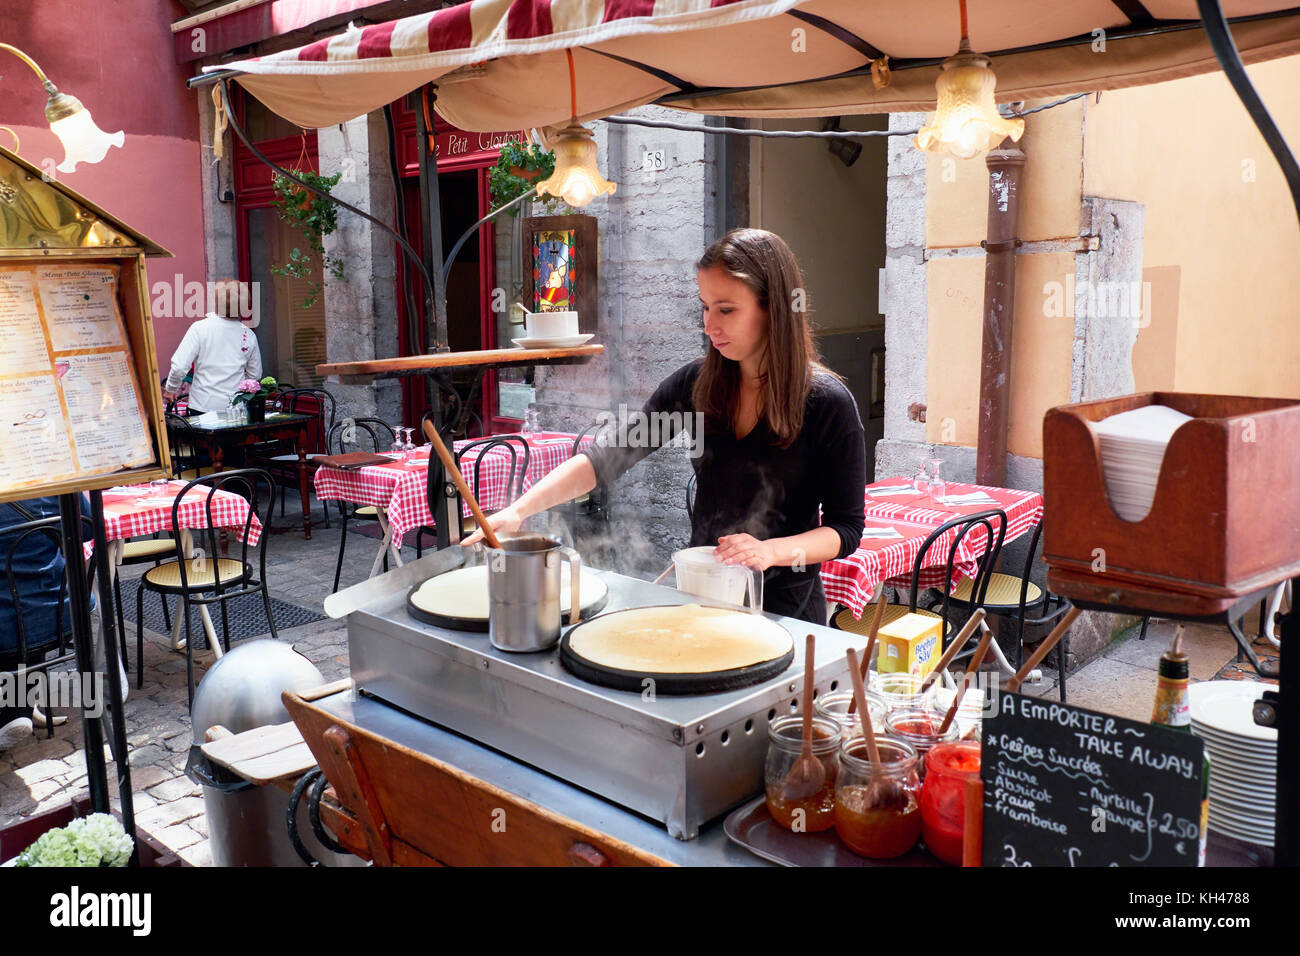 Young Woman is Making Crepes outdoors, Old Lyon, France Stock Photo